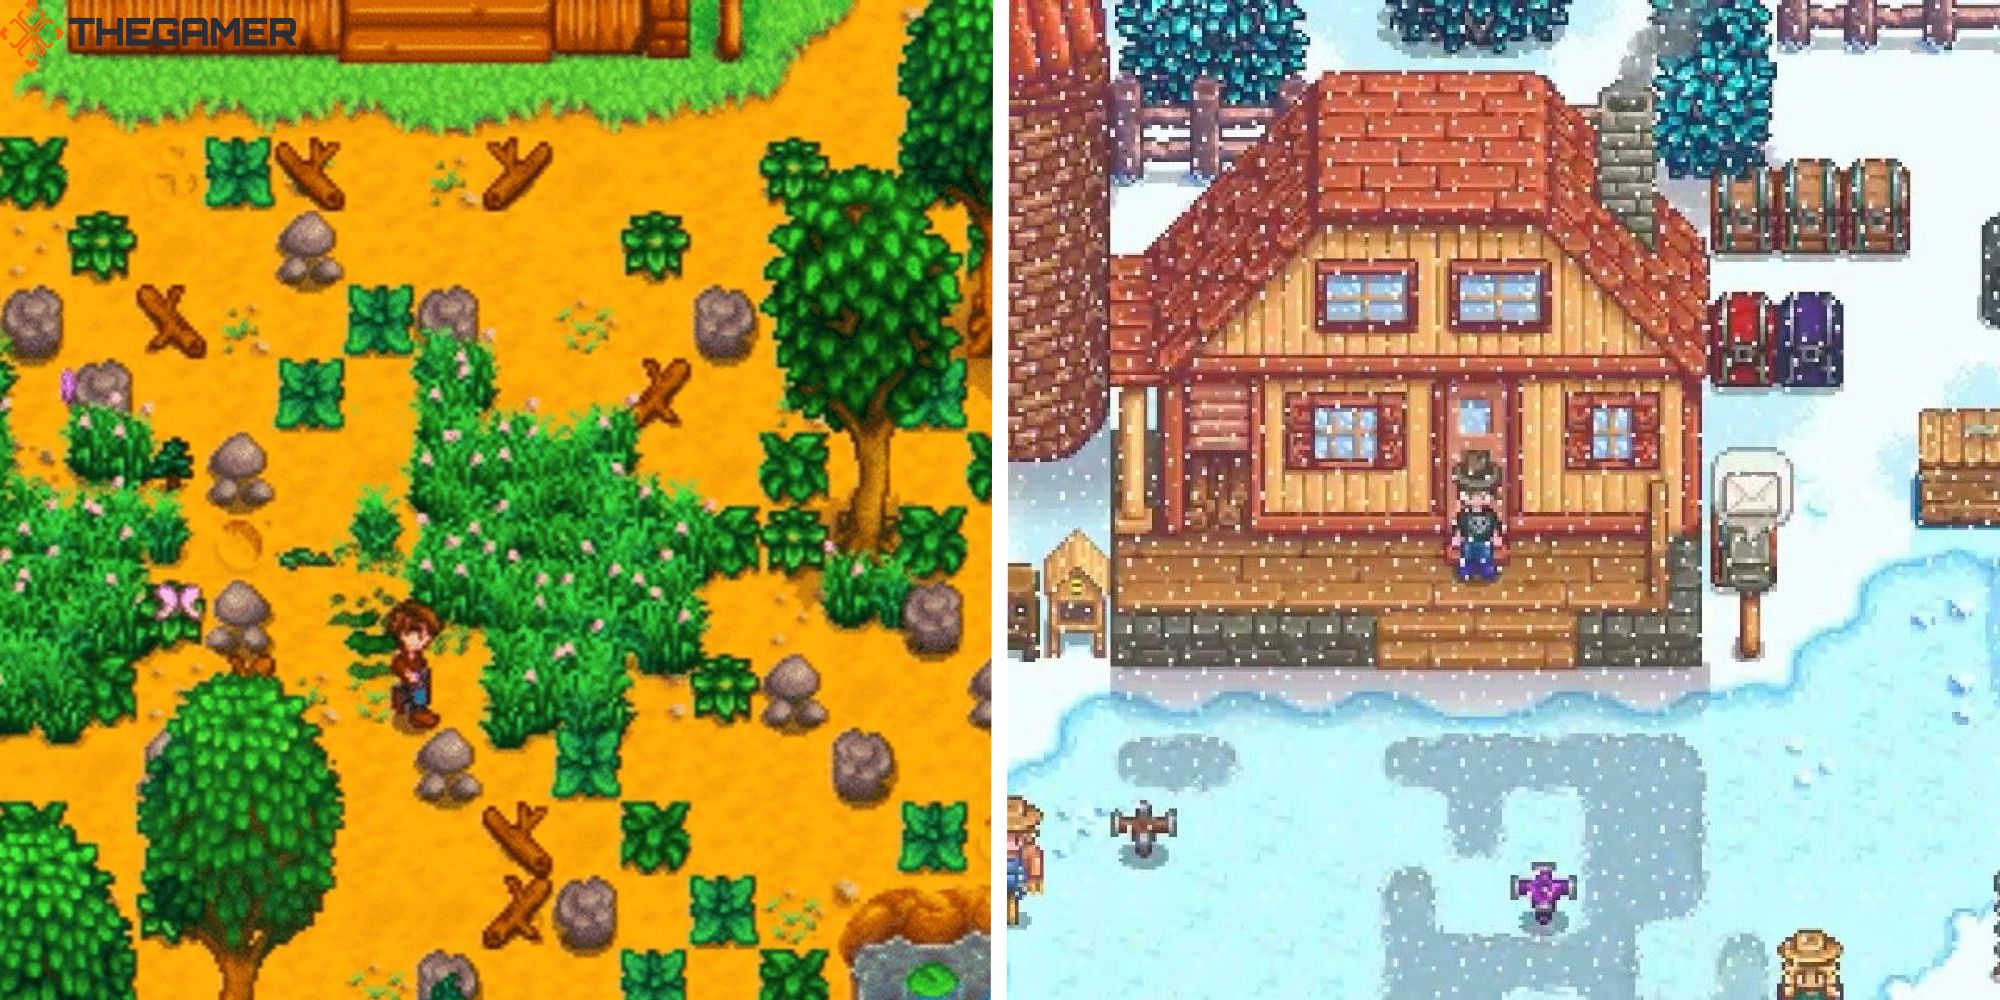 image of player in overgrown farm next to image of farmhouse during the winter